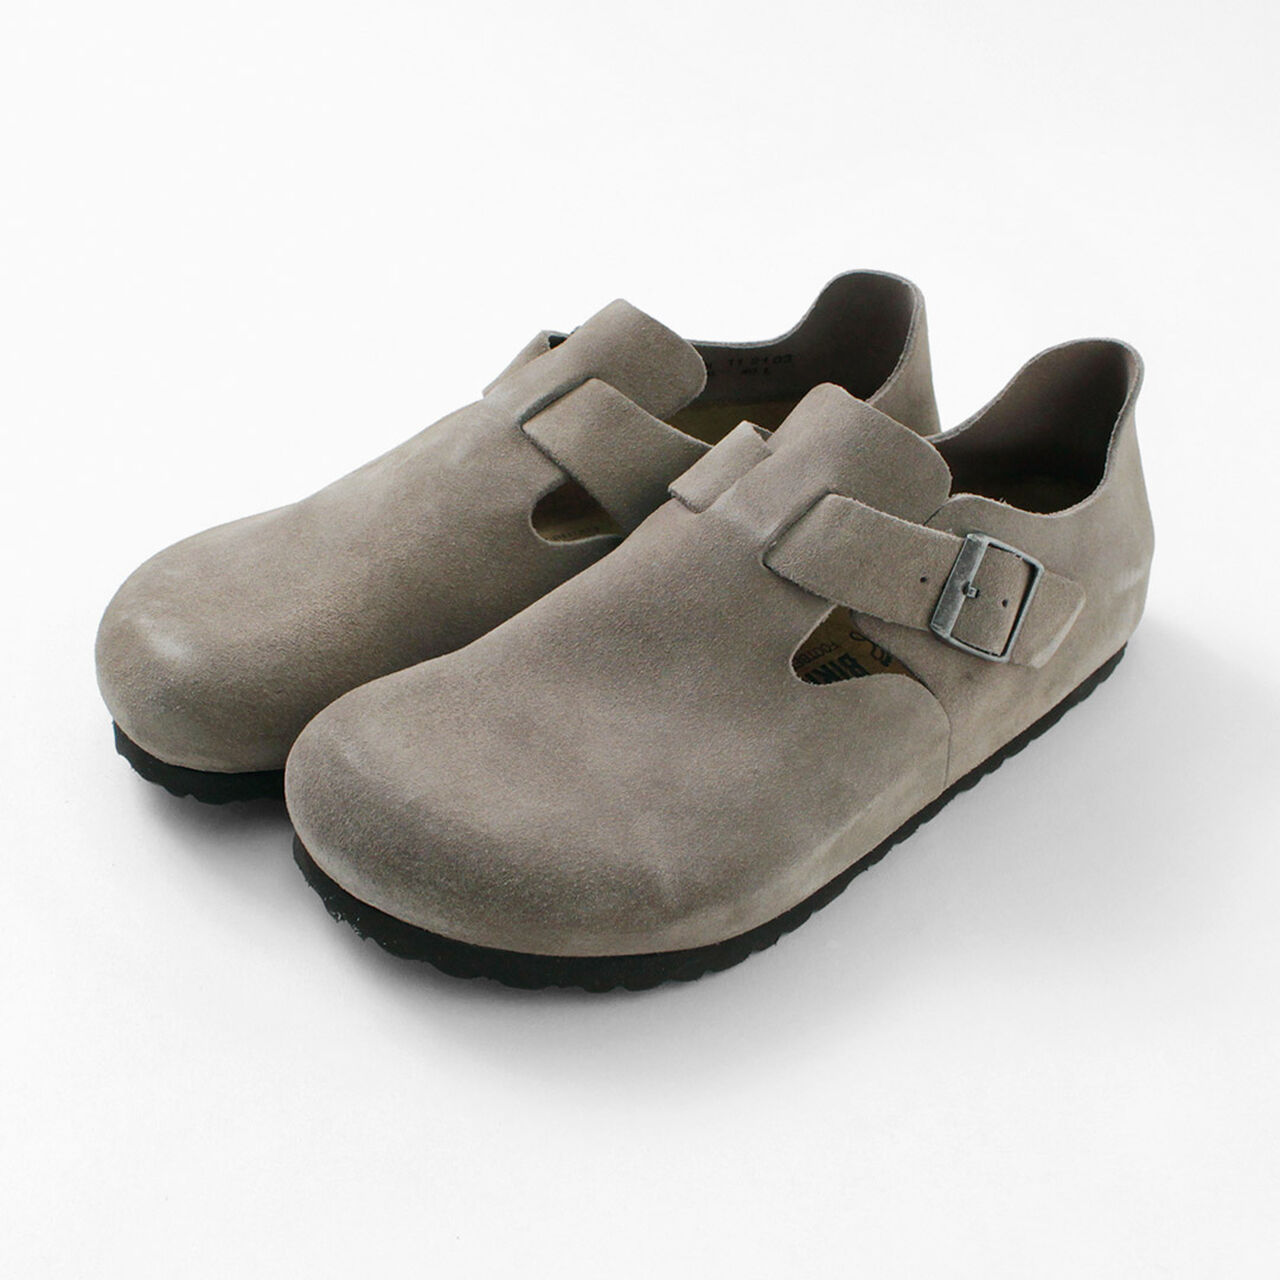 LONDON / SUEDE LEATHER VELOUR LEATHER SHOES,Taupe, large image number 0